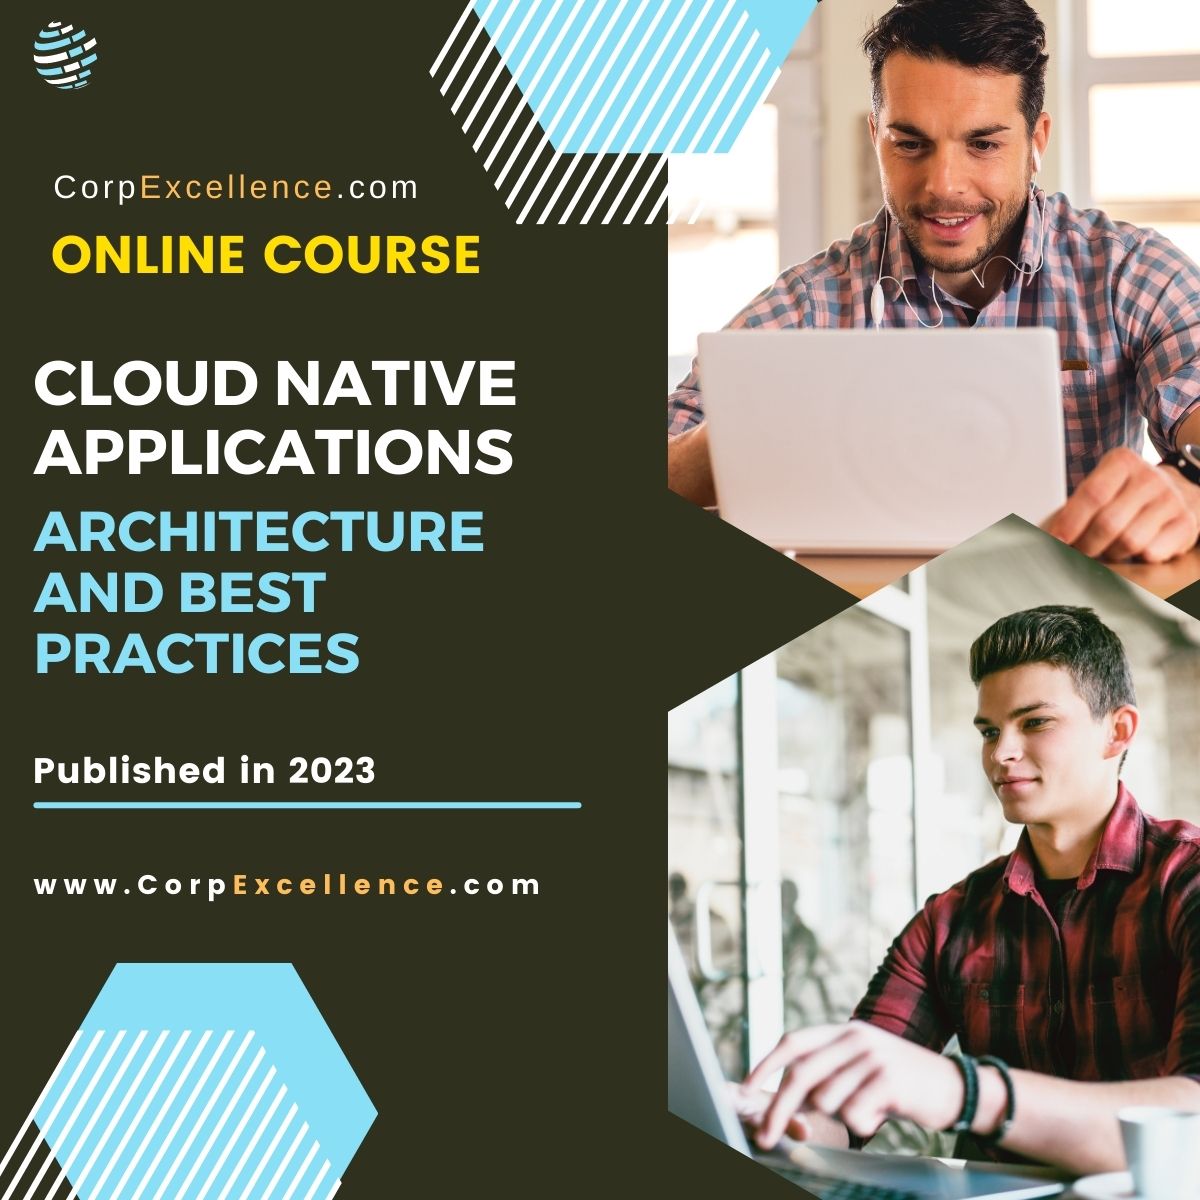 Here is a great course if you are looking to learn best practices on Cloud-Native architecture. Also covers the latest 2023 tech industry trends. #cloudnative #cloudarchitecture #techtrends 

lnkd.in/gGvbSDUq 

lnkd.in/gda6tAqq